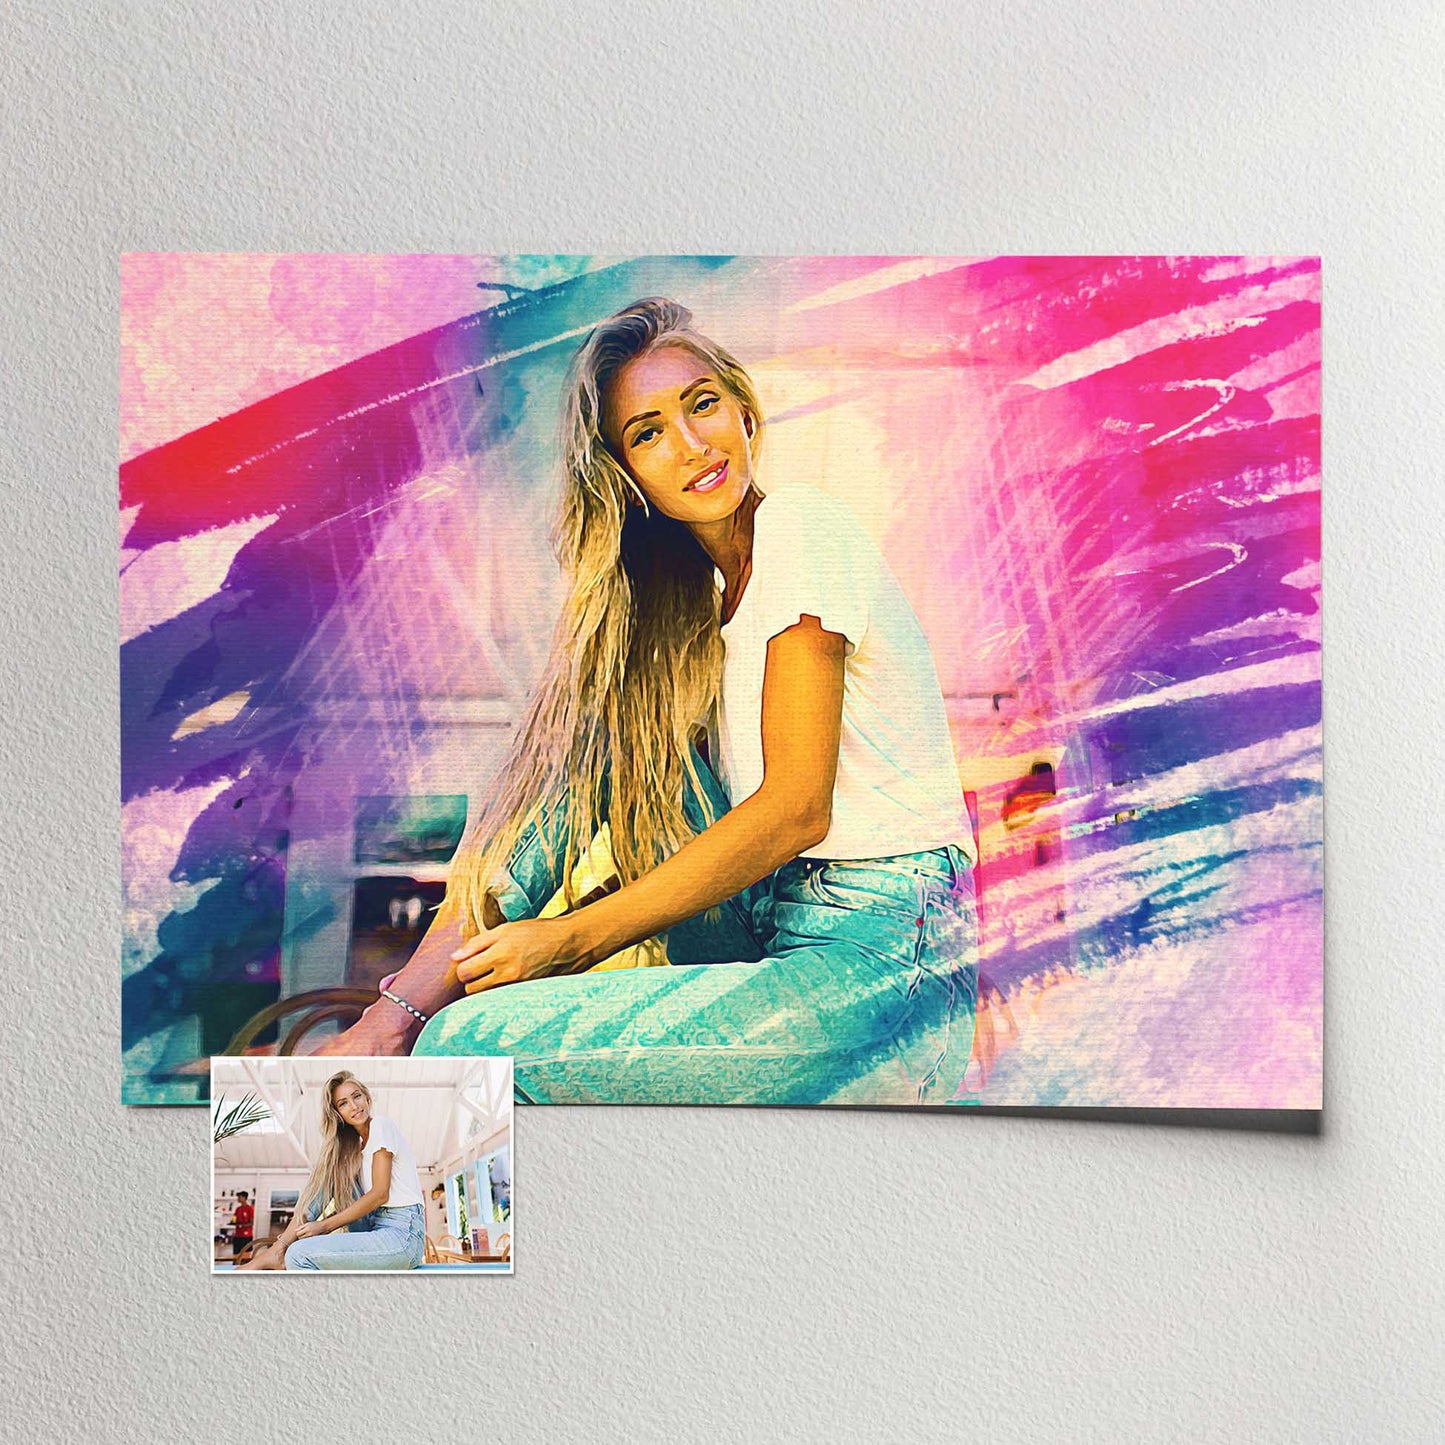 Immerse yourself in the beauty of a Personalised Brush Painting Print, where your photo is transformed into a stunning watercolor style artwork with a mesmerizing brushstroke effect. The captivating purple, pink, and blue hues 